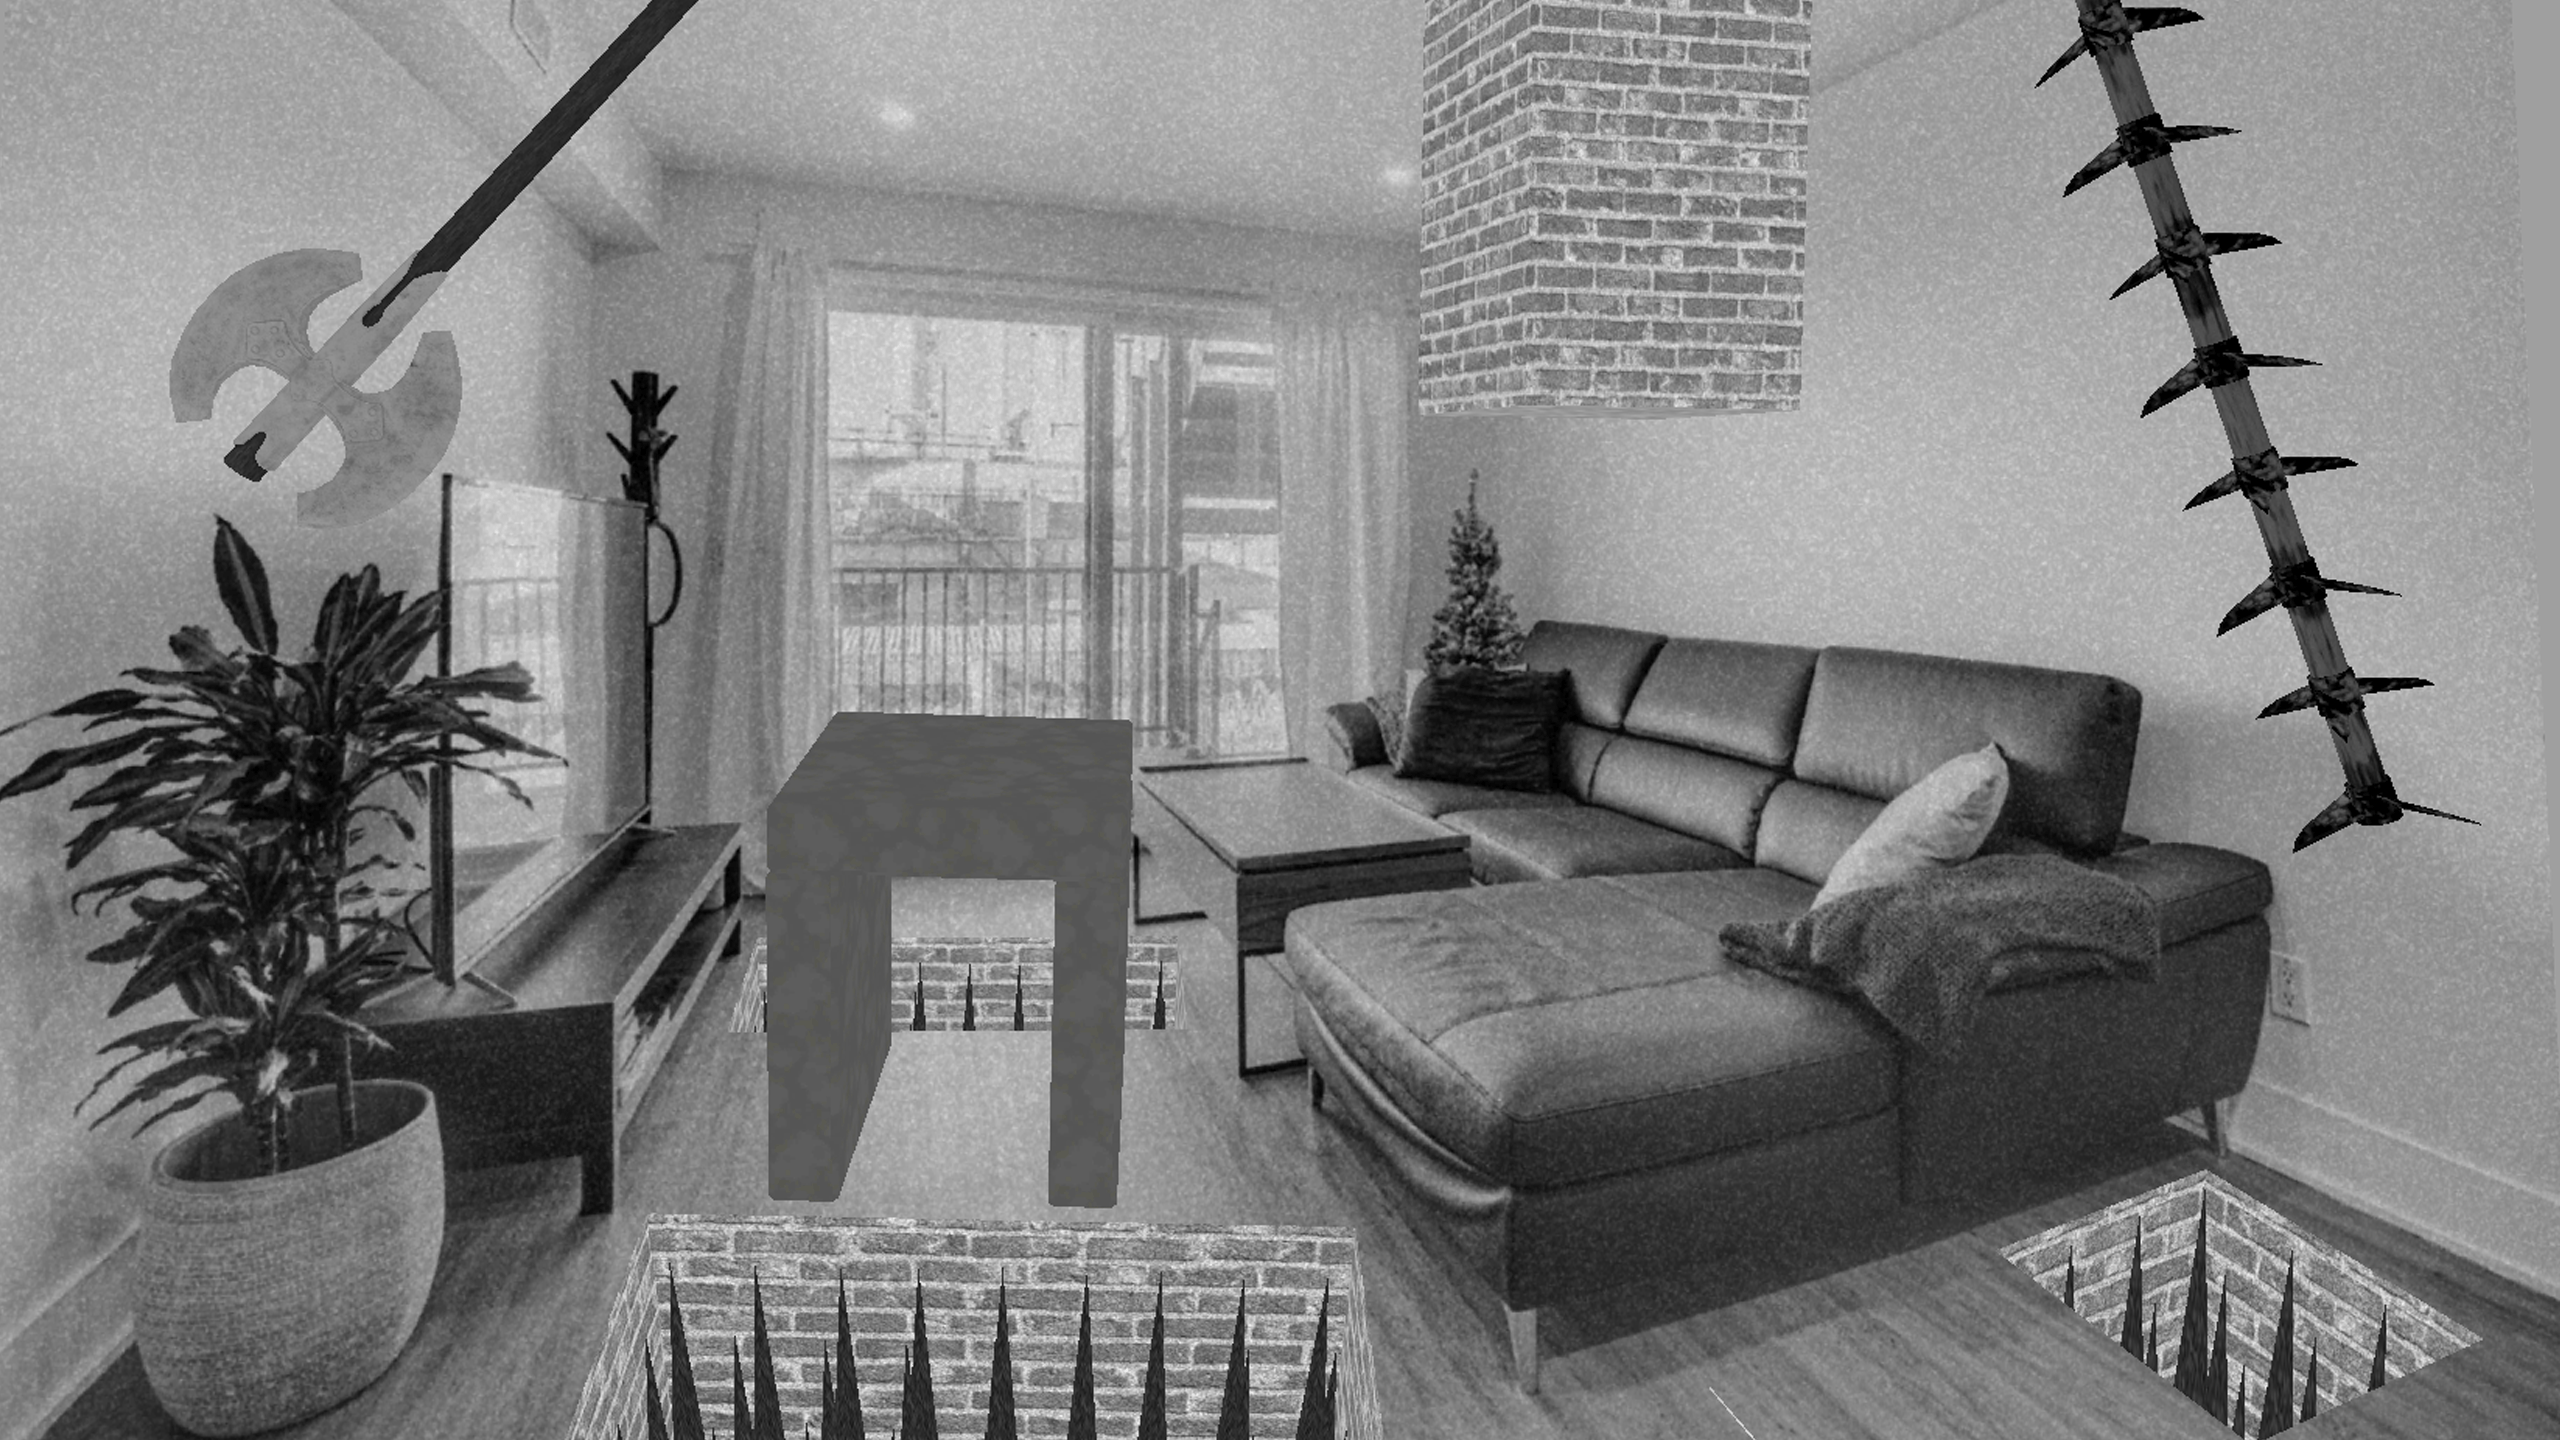 Meta Quest 2: AR game turns the apartment into a death trap